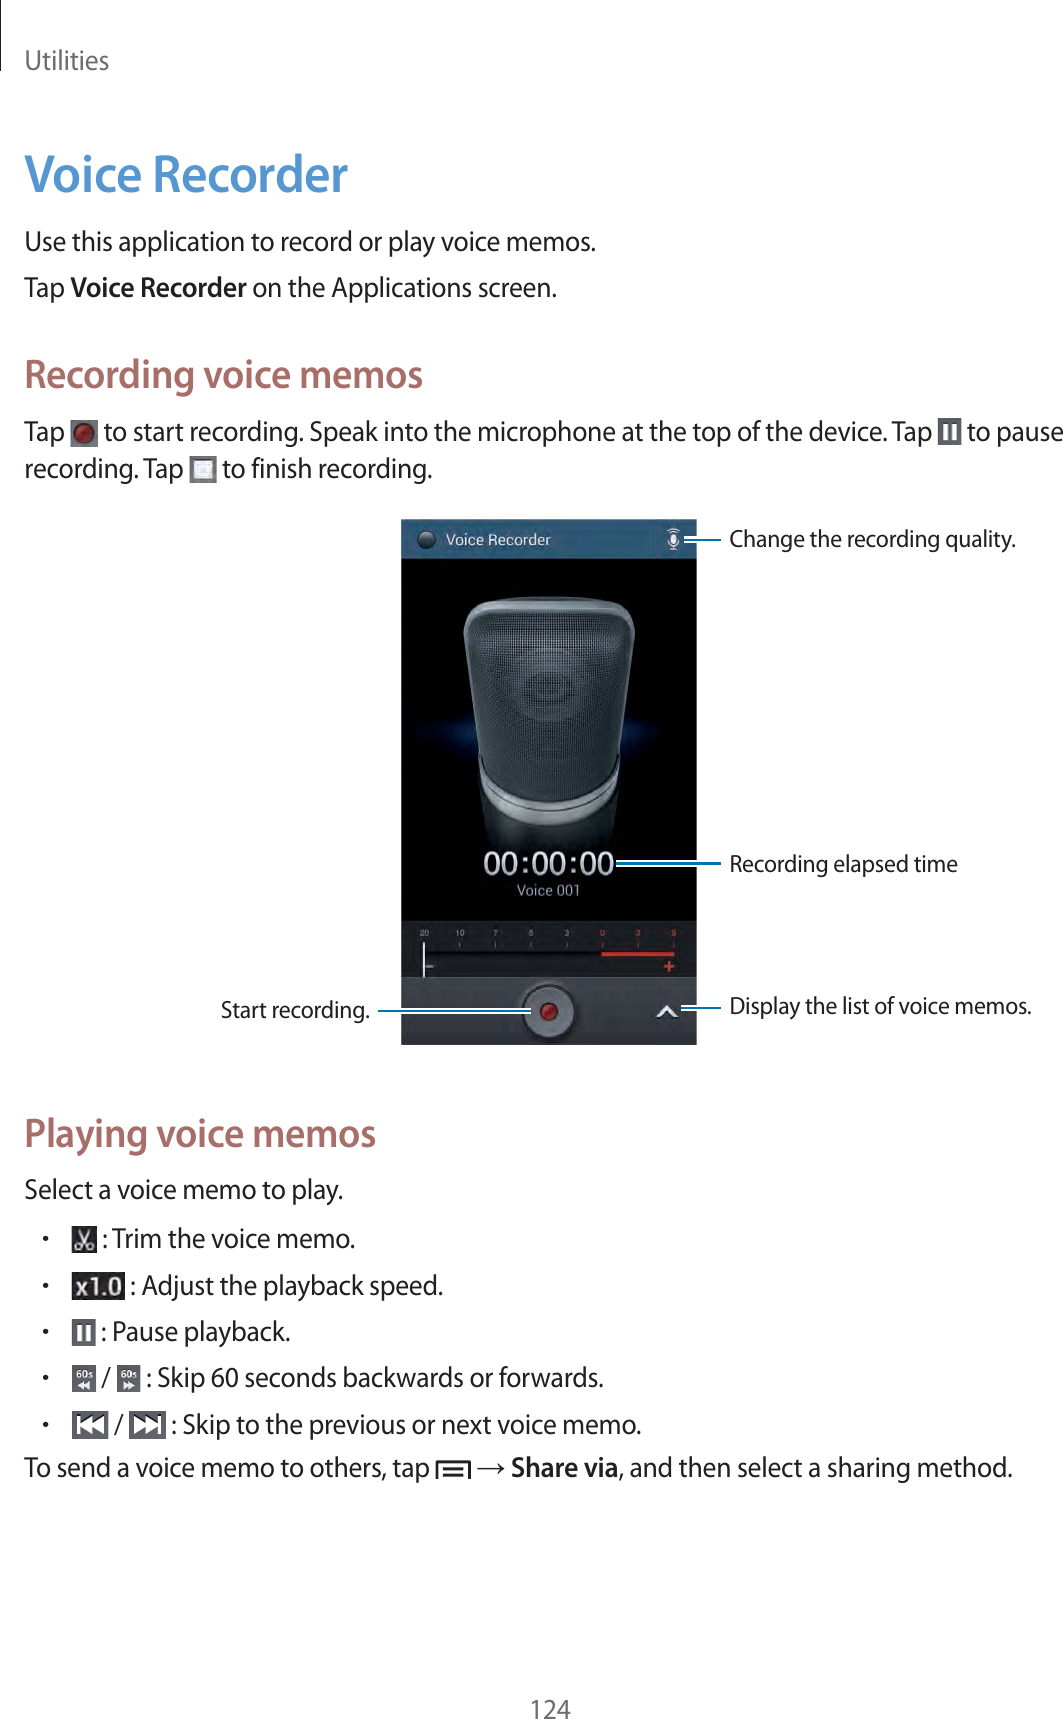 Utilities124Voice RecorderUse this application to record or play voice memos.Tap Voice Recorder on the Applications screen.Recording voice memosTap   to start recording. Speak into the microphone at the top of the device. Tap   to pause recording. Tap   to finish recording.Recording elapsed timeDisplay the list of voice memos.Start recording.Change the recording quality.Playing voice memosSelect a voice memo to play.r : Trim the voice memo.r : Adjust the playback speed.r : Pause playback.r /   : Skip 60 seconds backwards or forwards.r /   : Skip to the previous or next voice memo.To send a voice memo to others, tap   ĺ Share via, and then select a sharing method.